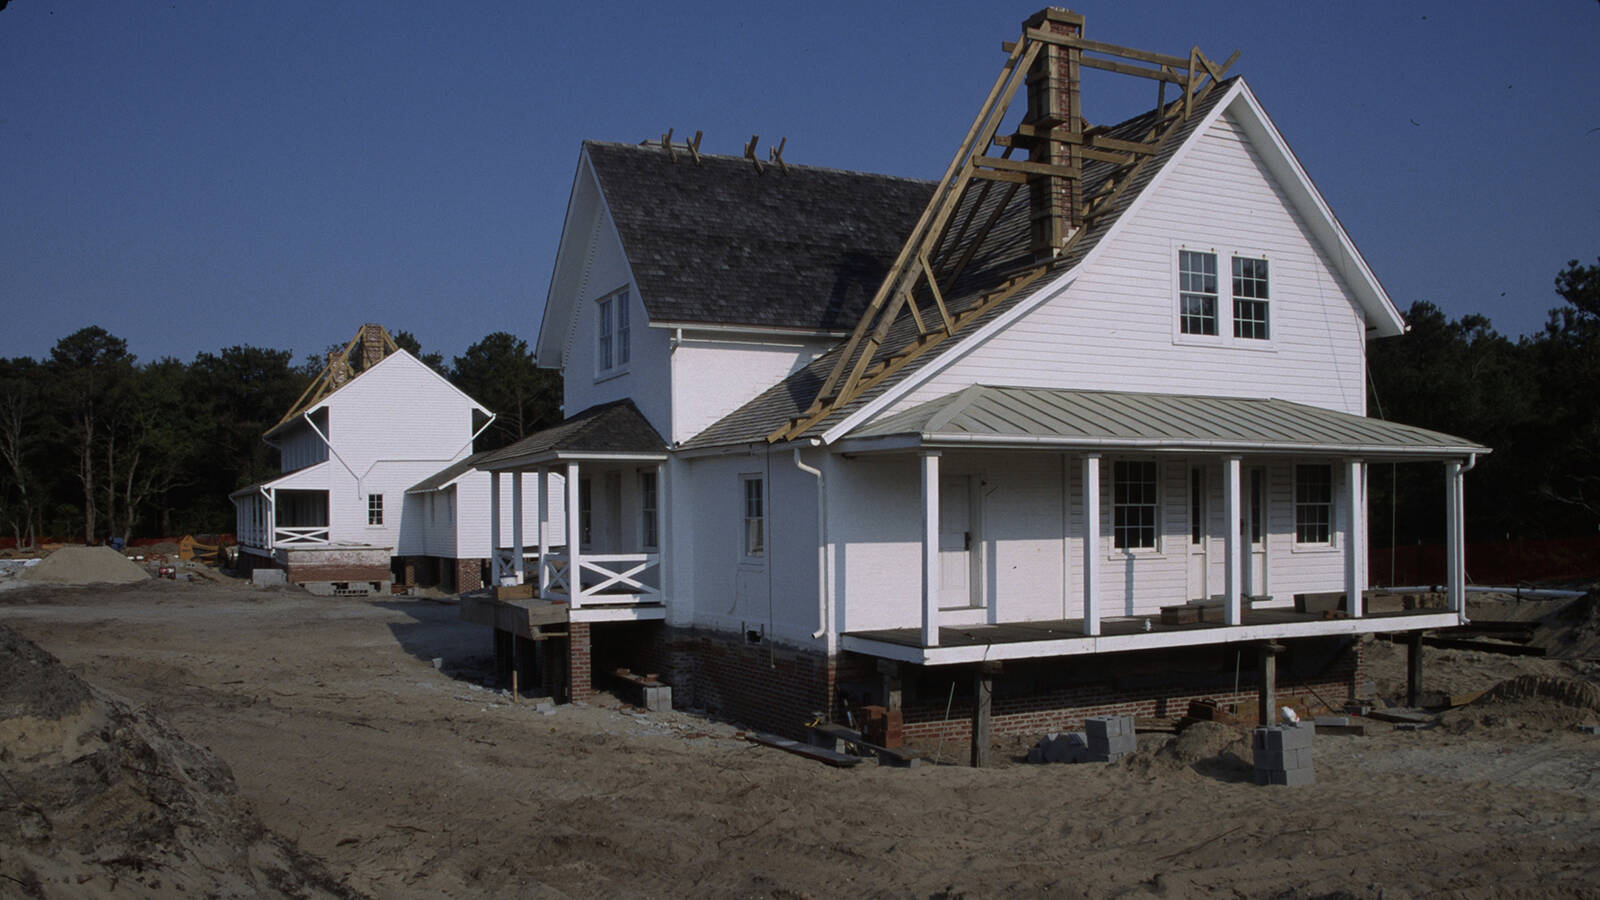 <p>The Principal Keeper's Quarters and Double Keepers' Quarters atop new pilings and foundations at the new site for the Cape Hatteras Light Station on June 3, 1999. </p>